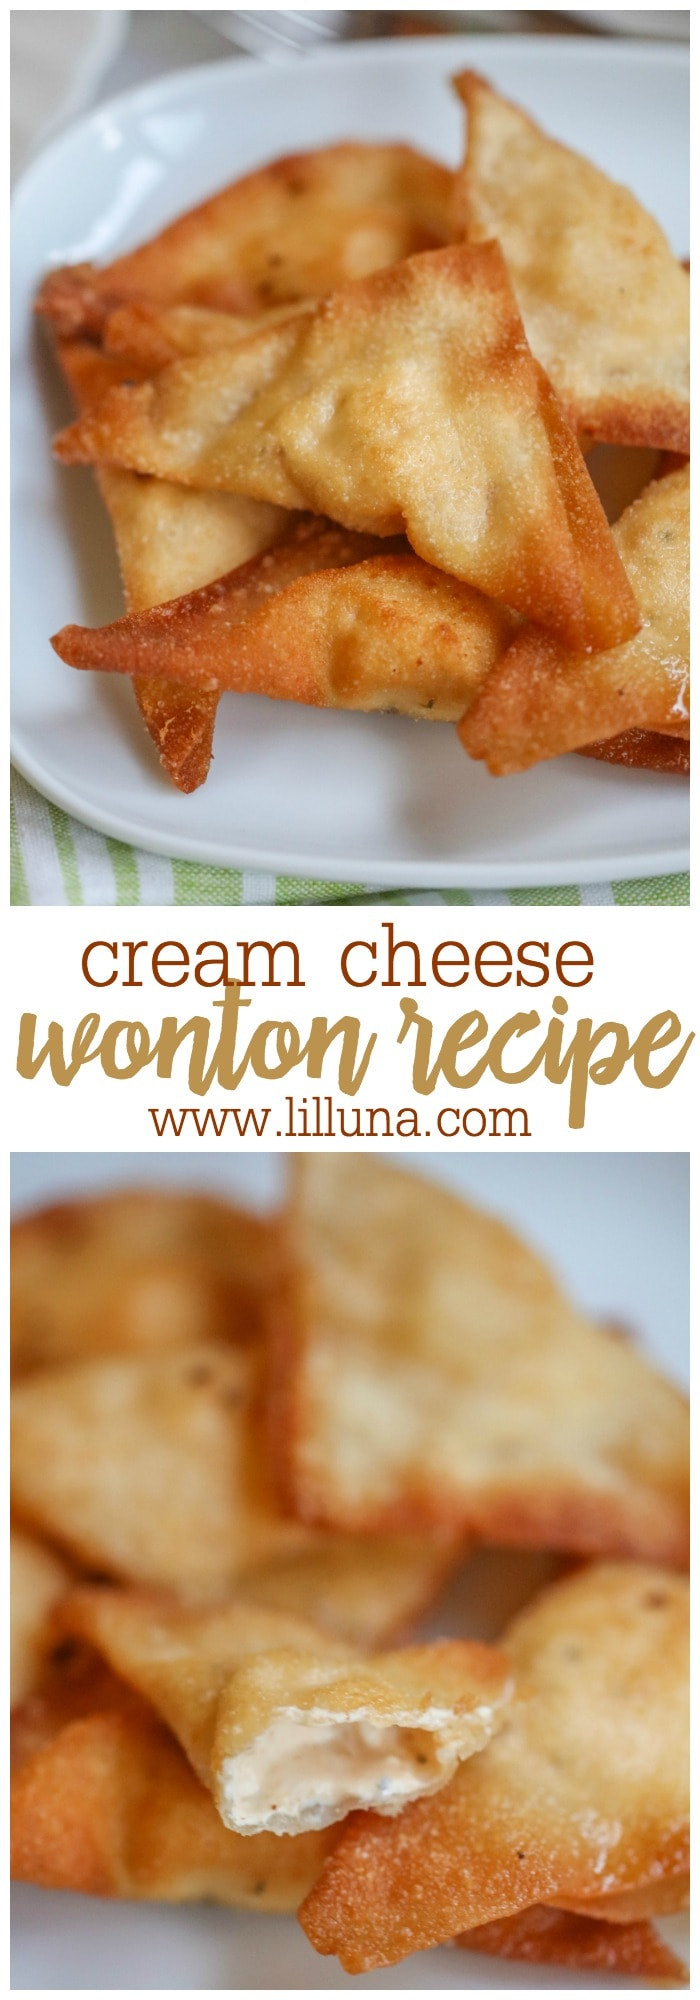 Wonton Appetizers With Cream Cheese
 BEST Cream Cheese Wontons